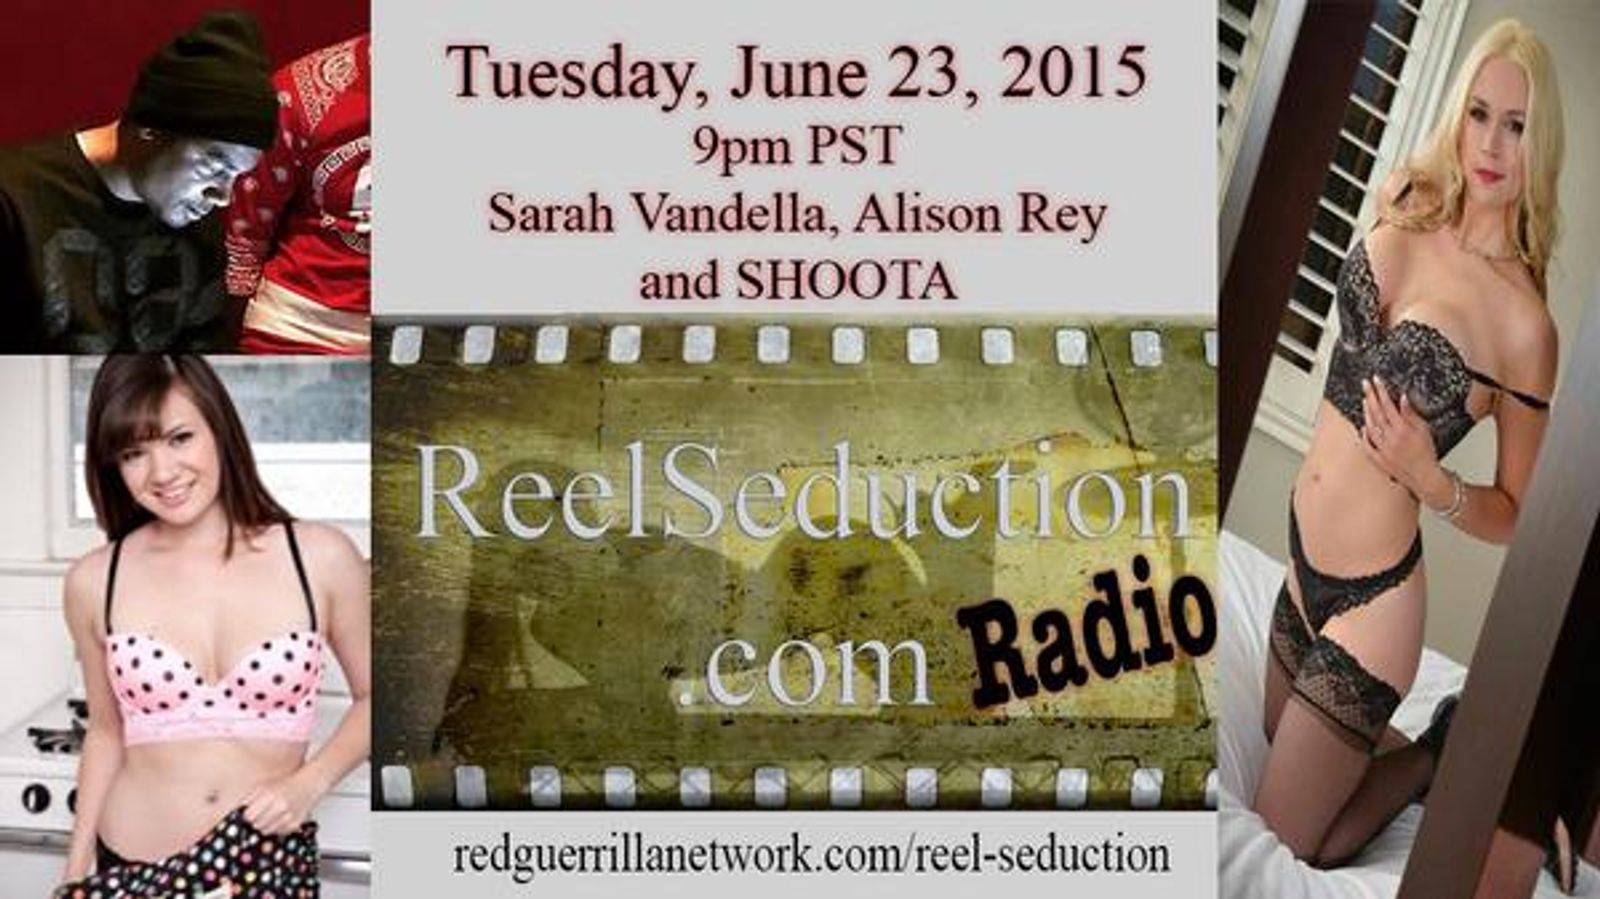 Alison Rey to Appear on 'Reel Seduction' This Tuesday